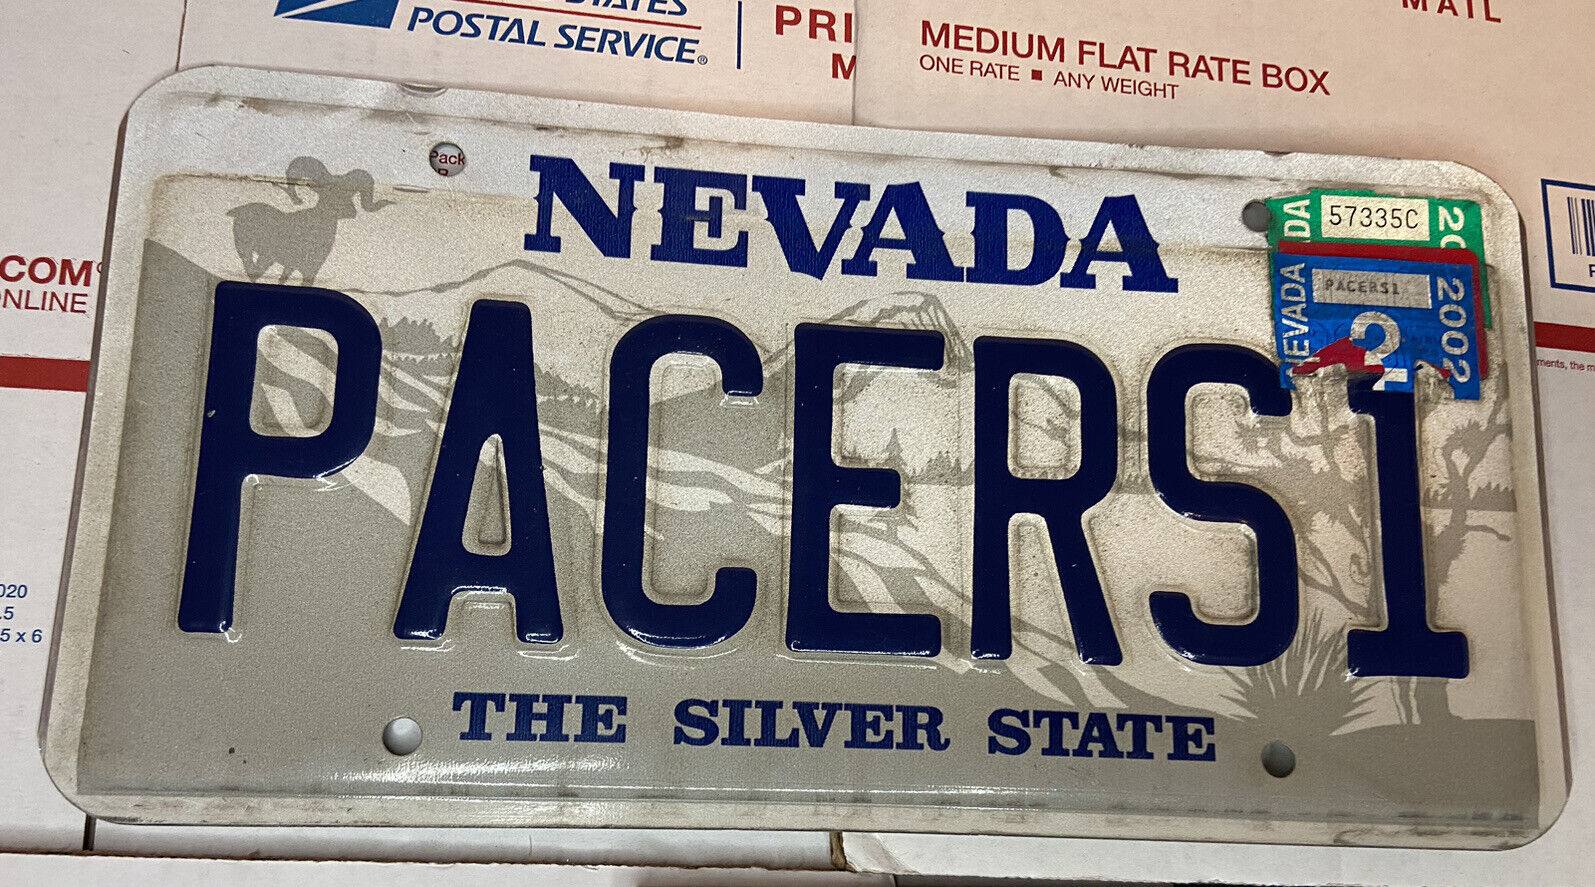 Nevada Vanity License plate PACERS1 Pacers The Silver State - 2000 Expired 2002